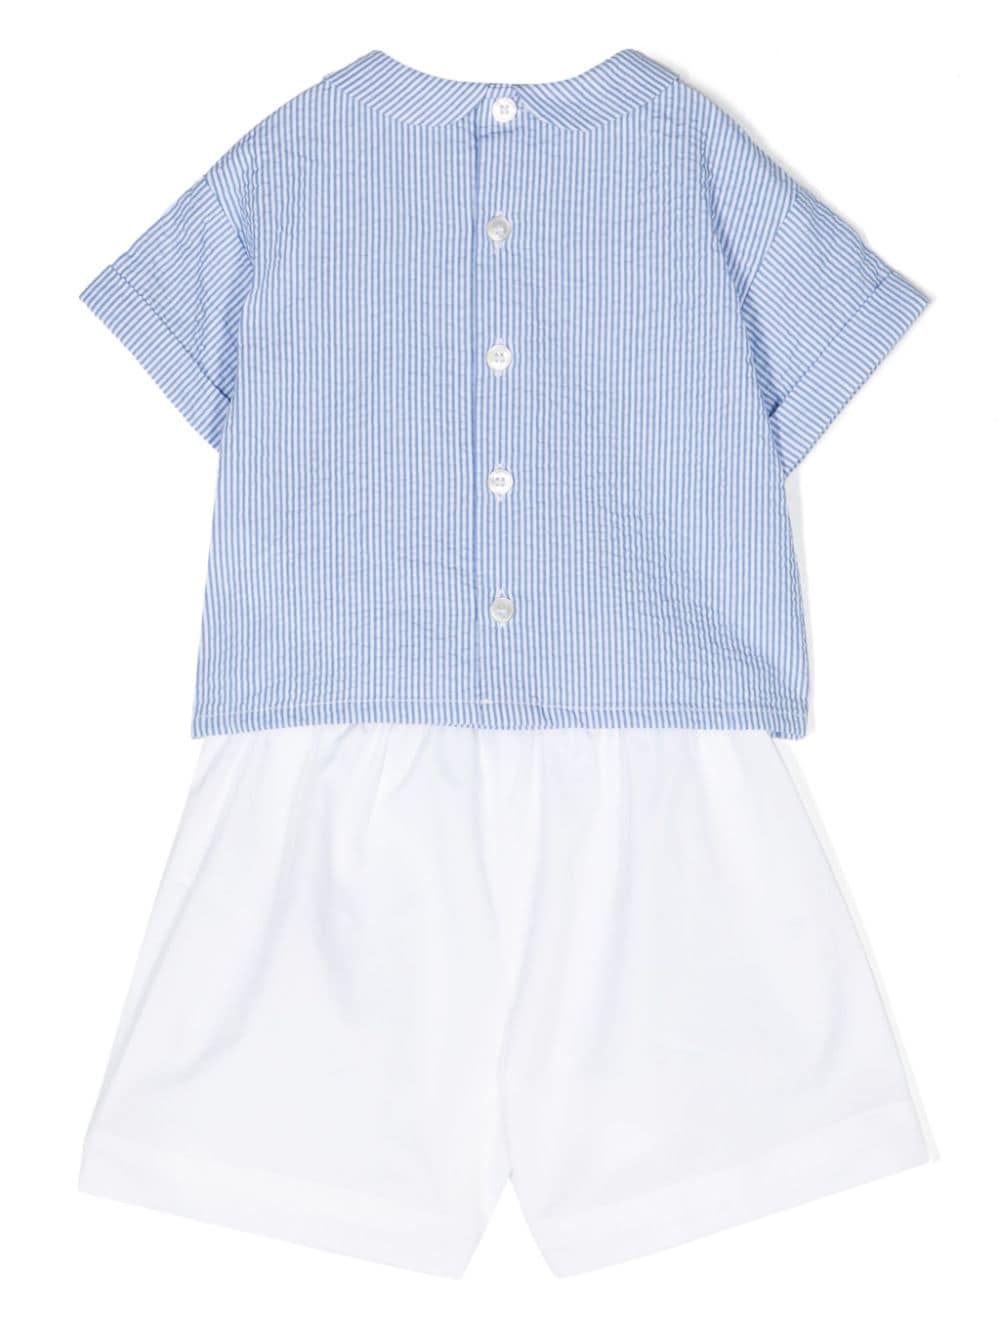 Light blue and white outfit for baby girls